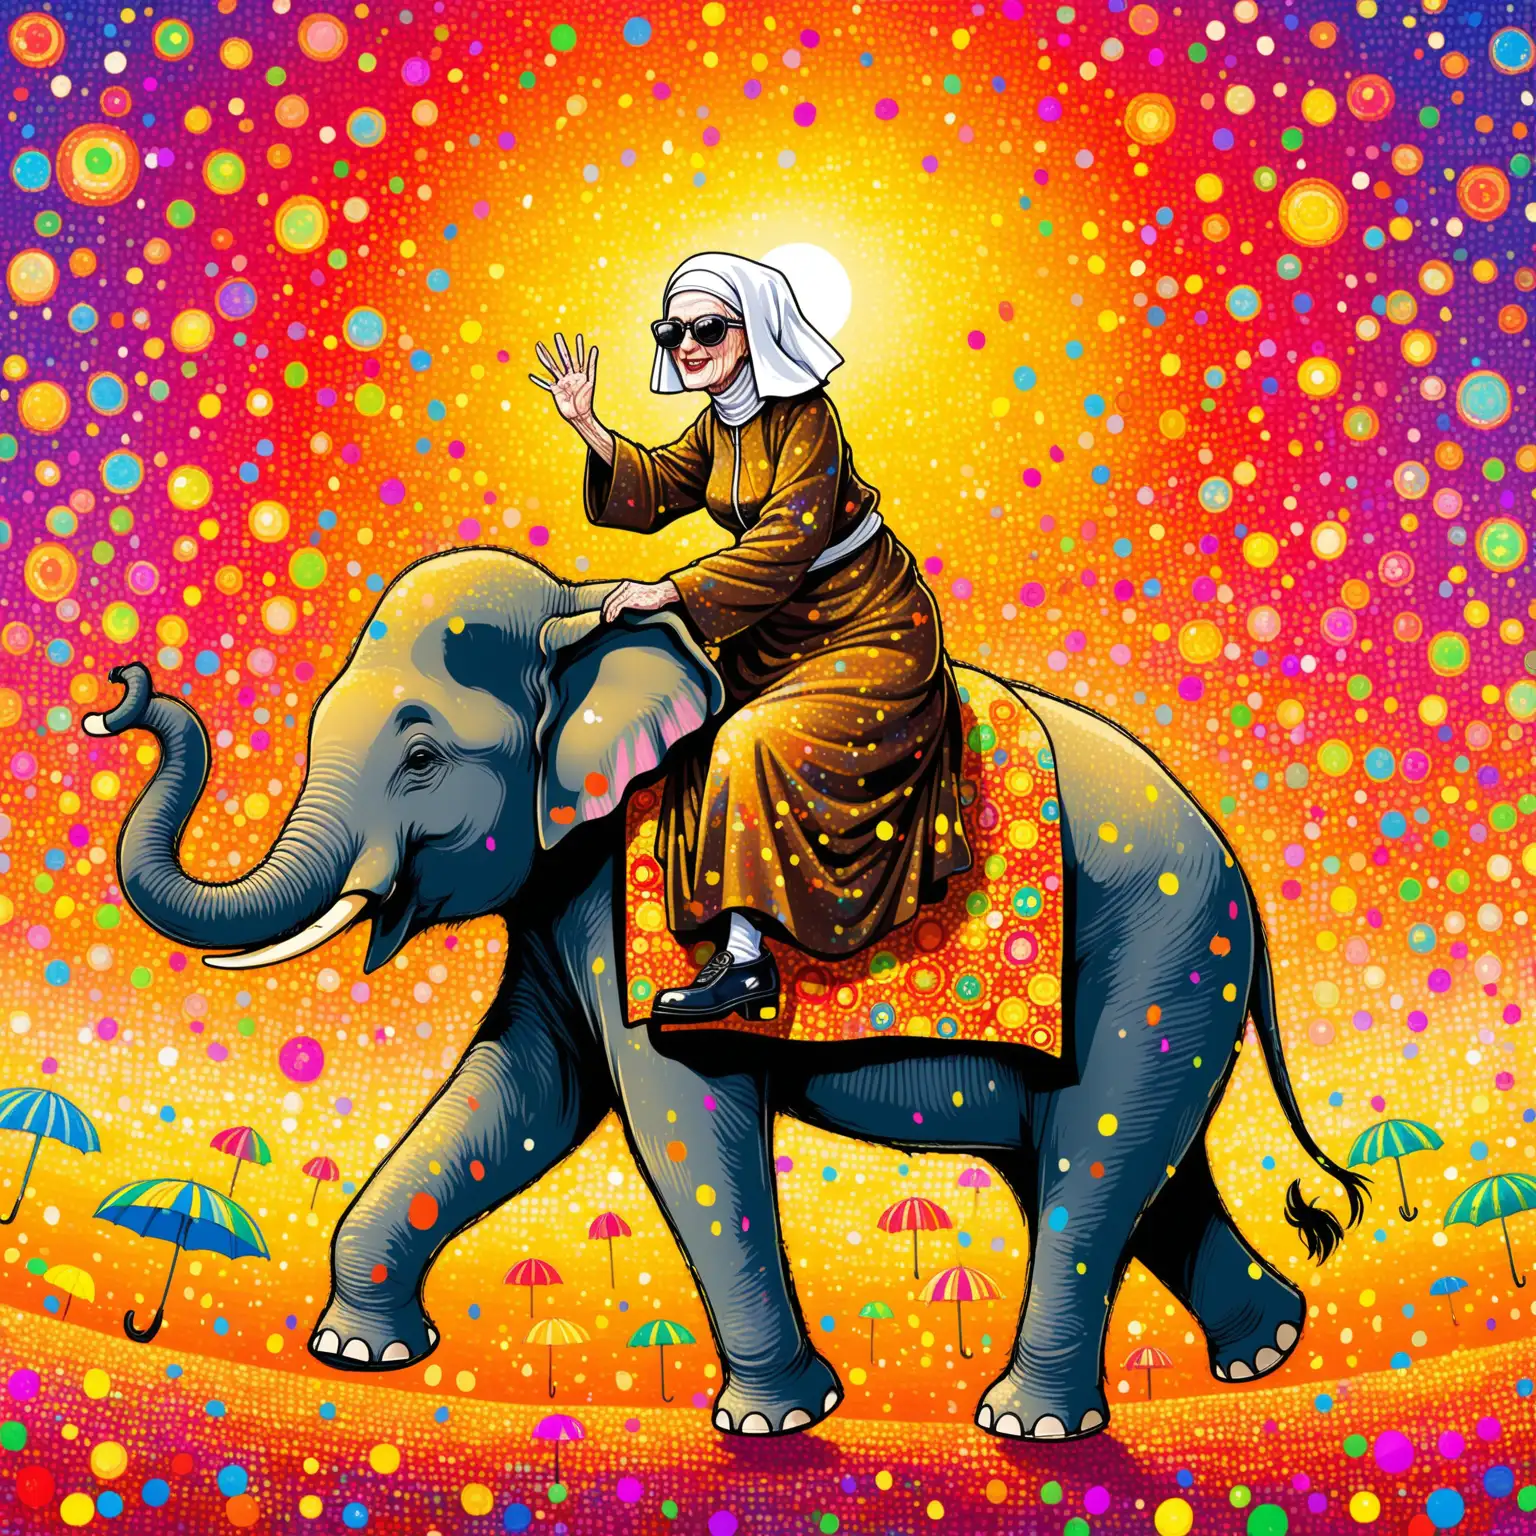 Eclectic Nun Rides Psychedelic Elephant at Fairground Sunset